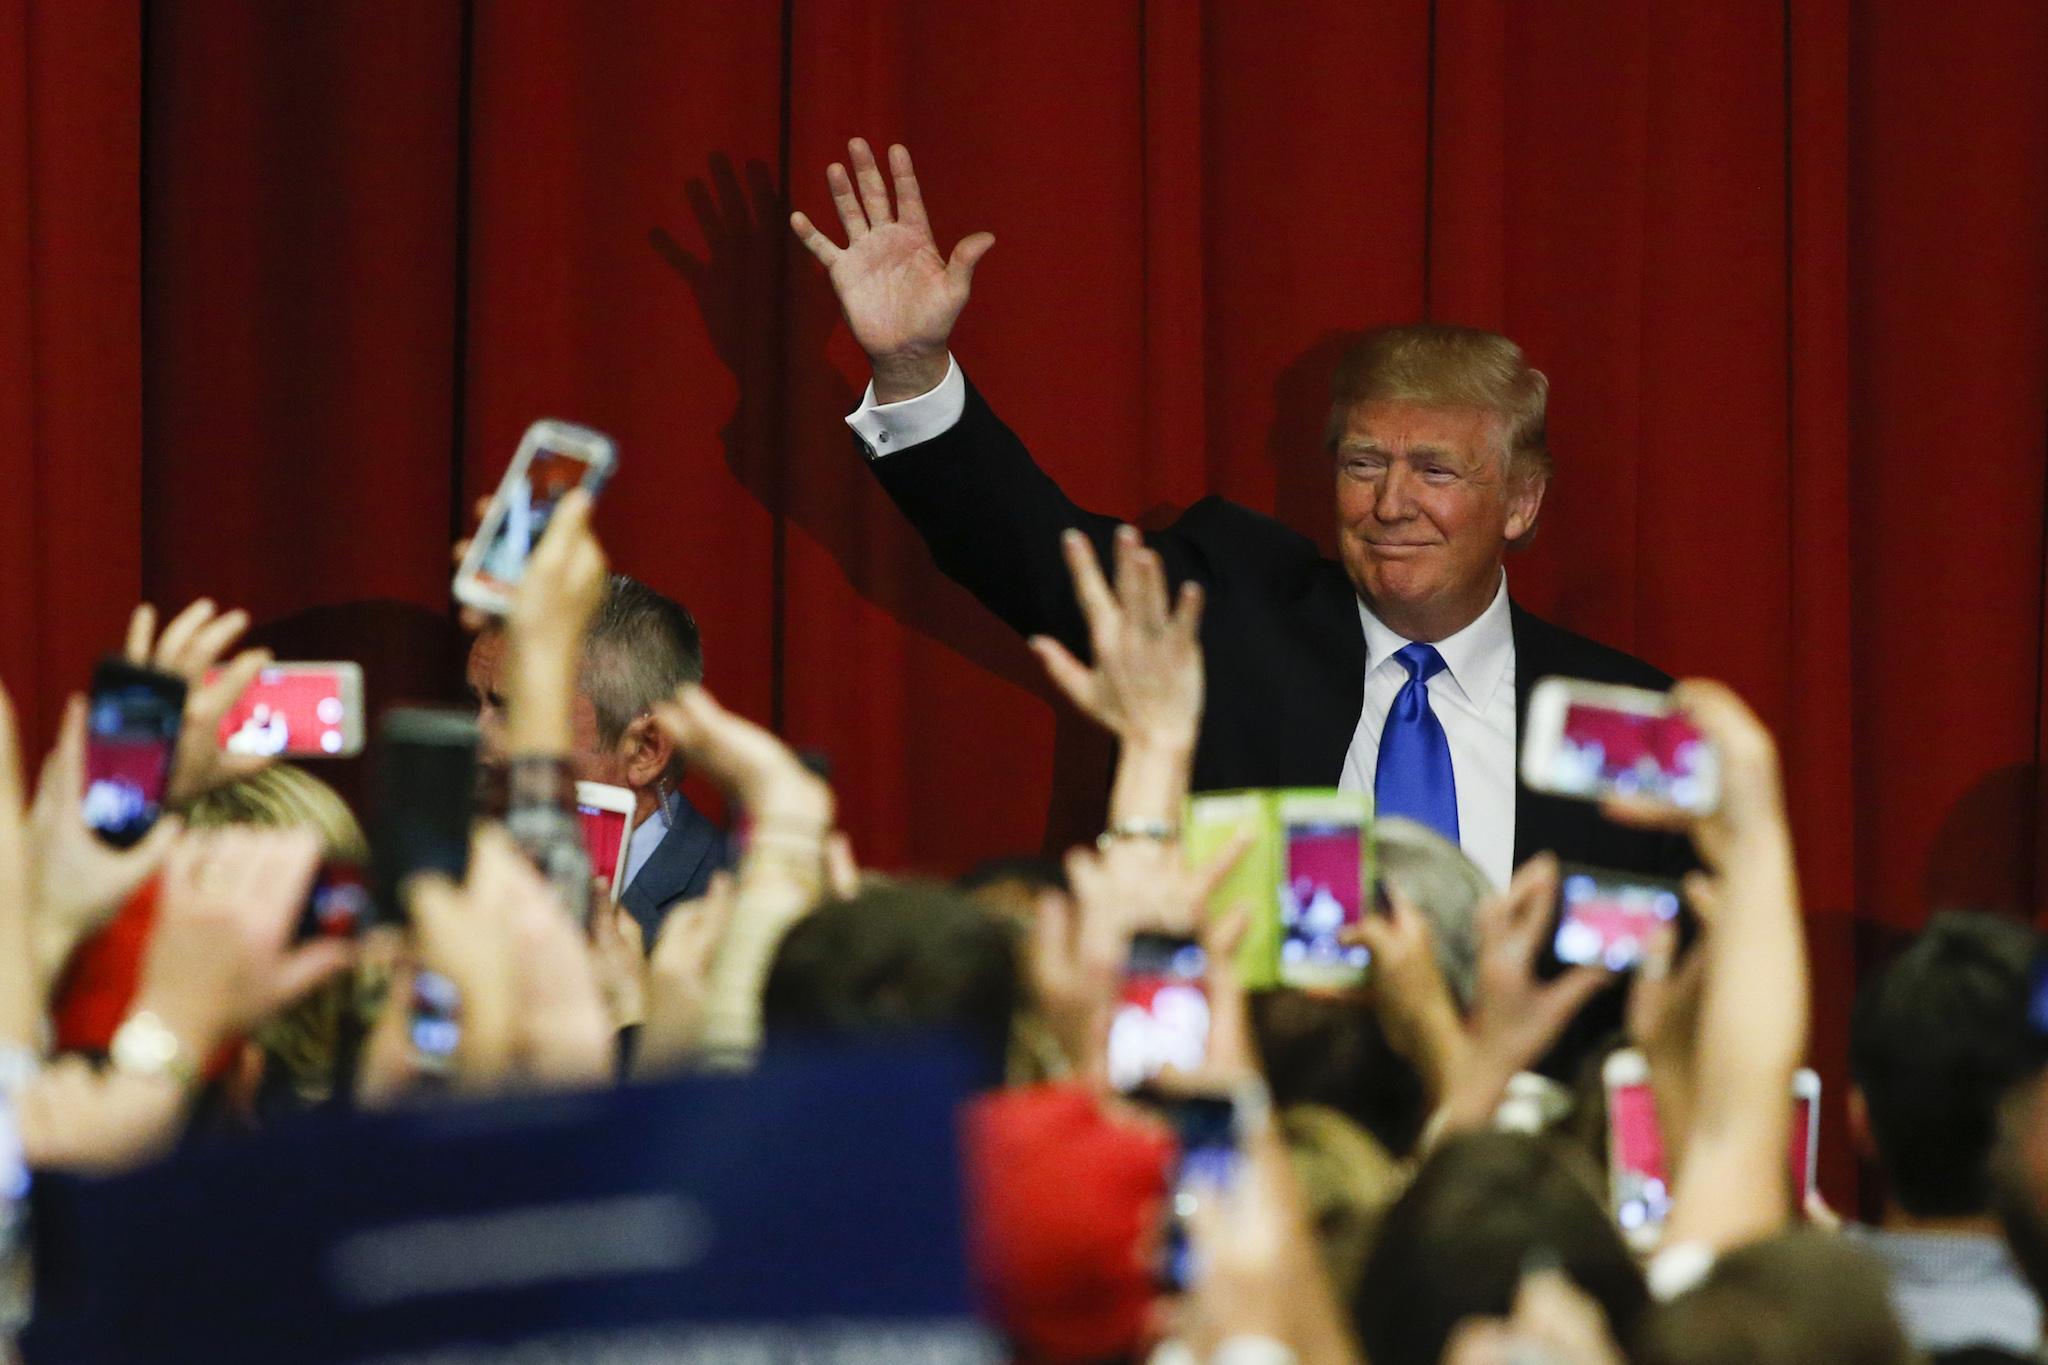 Republican presidential candidate Donald Trump waves to the crowd at a fundraising event